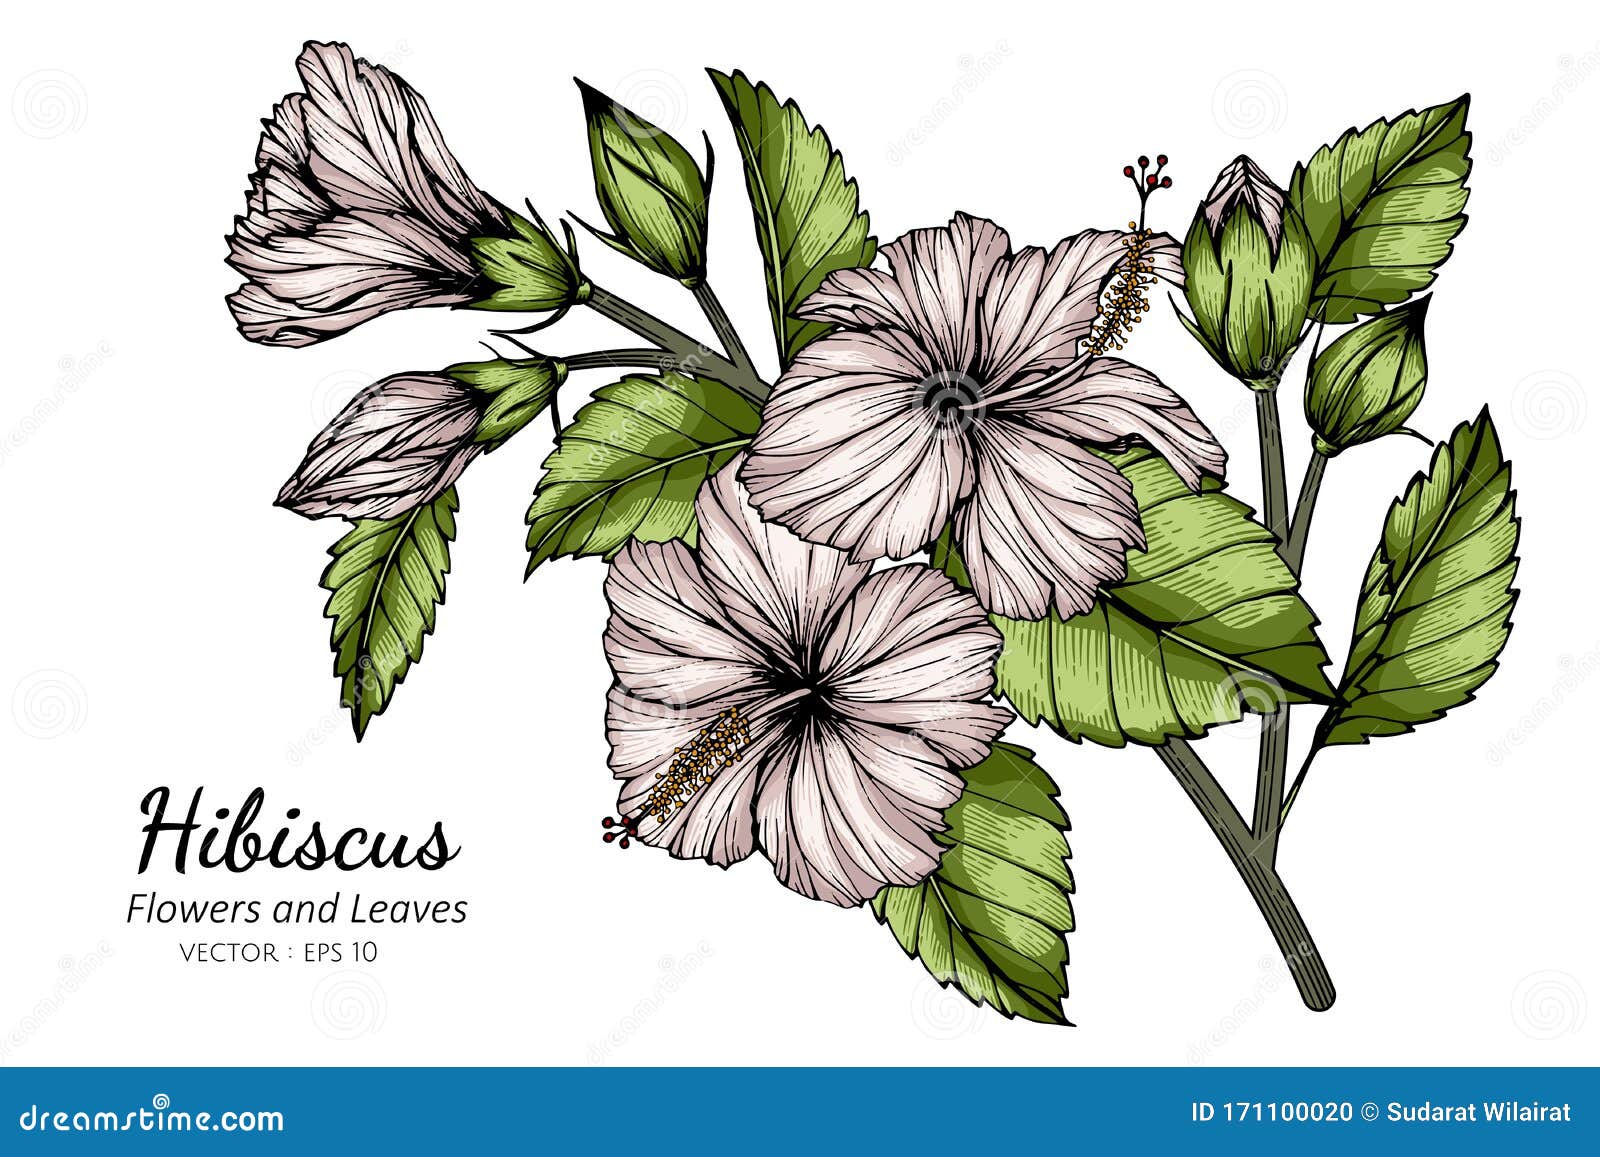 Sketch of a flower with leaves Royalty Free Vector Image